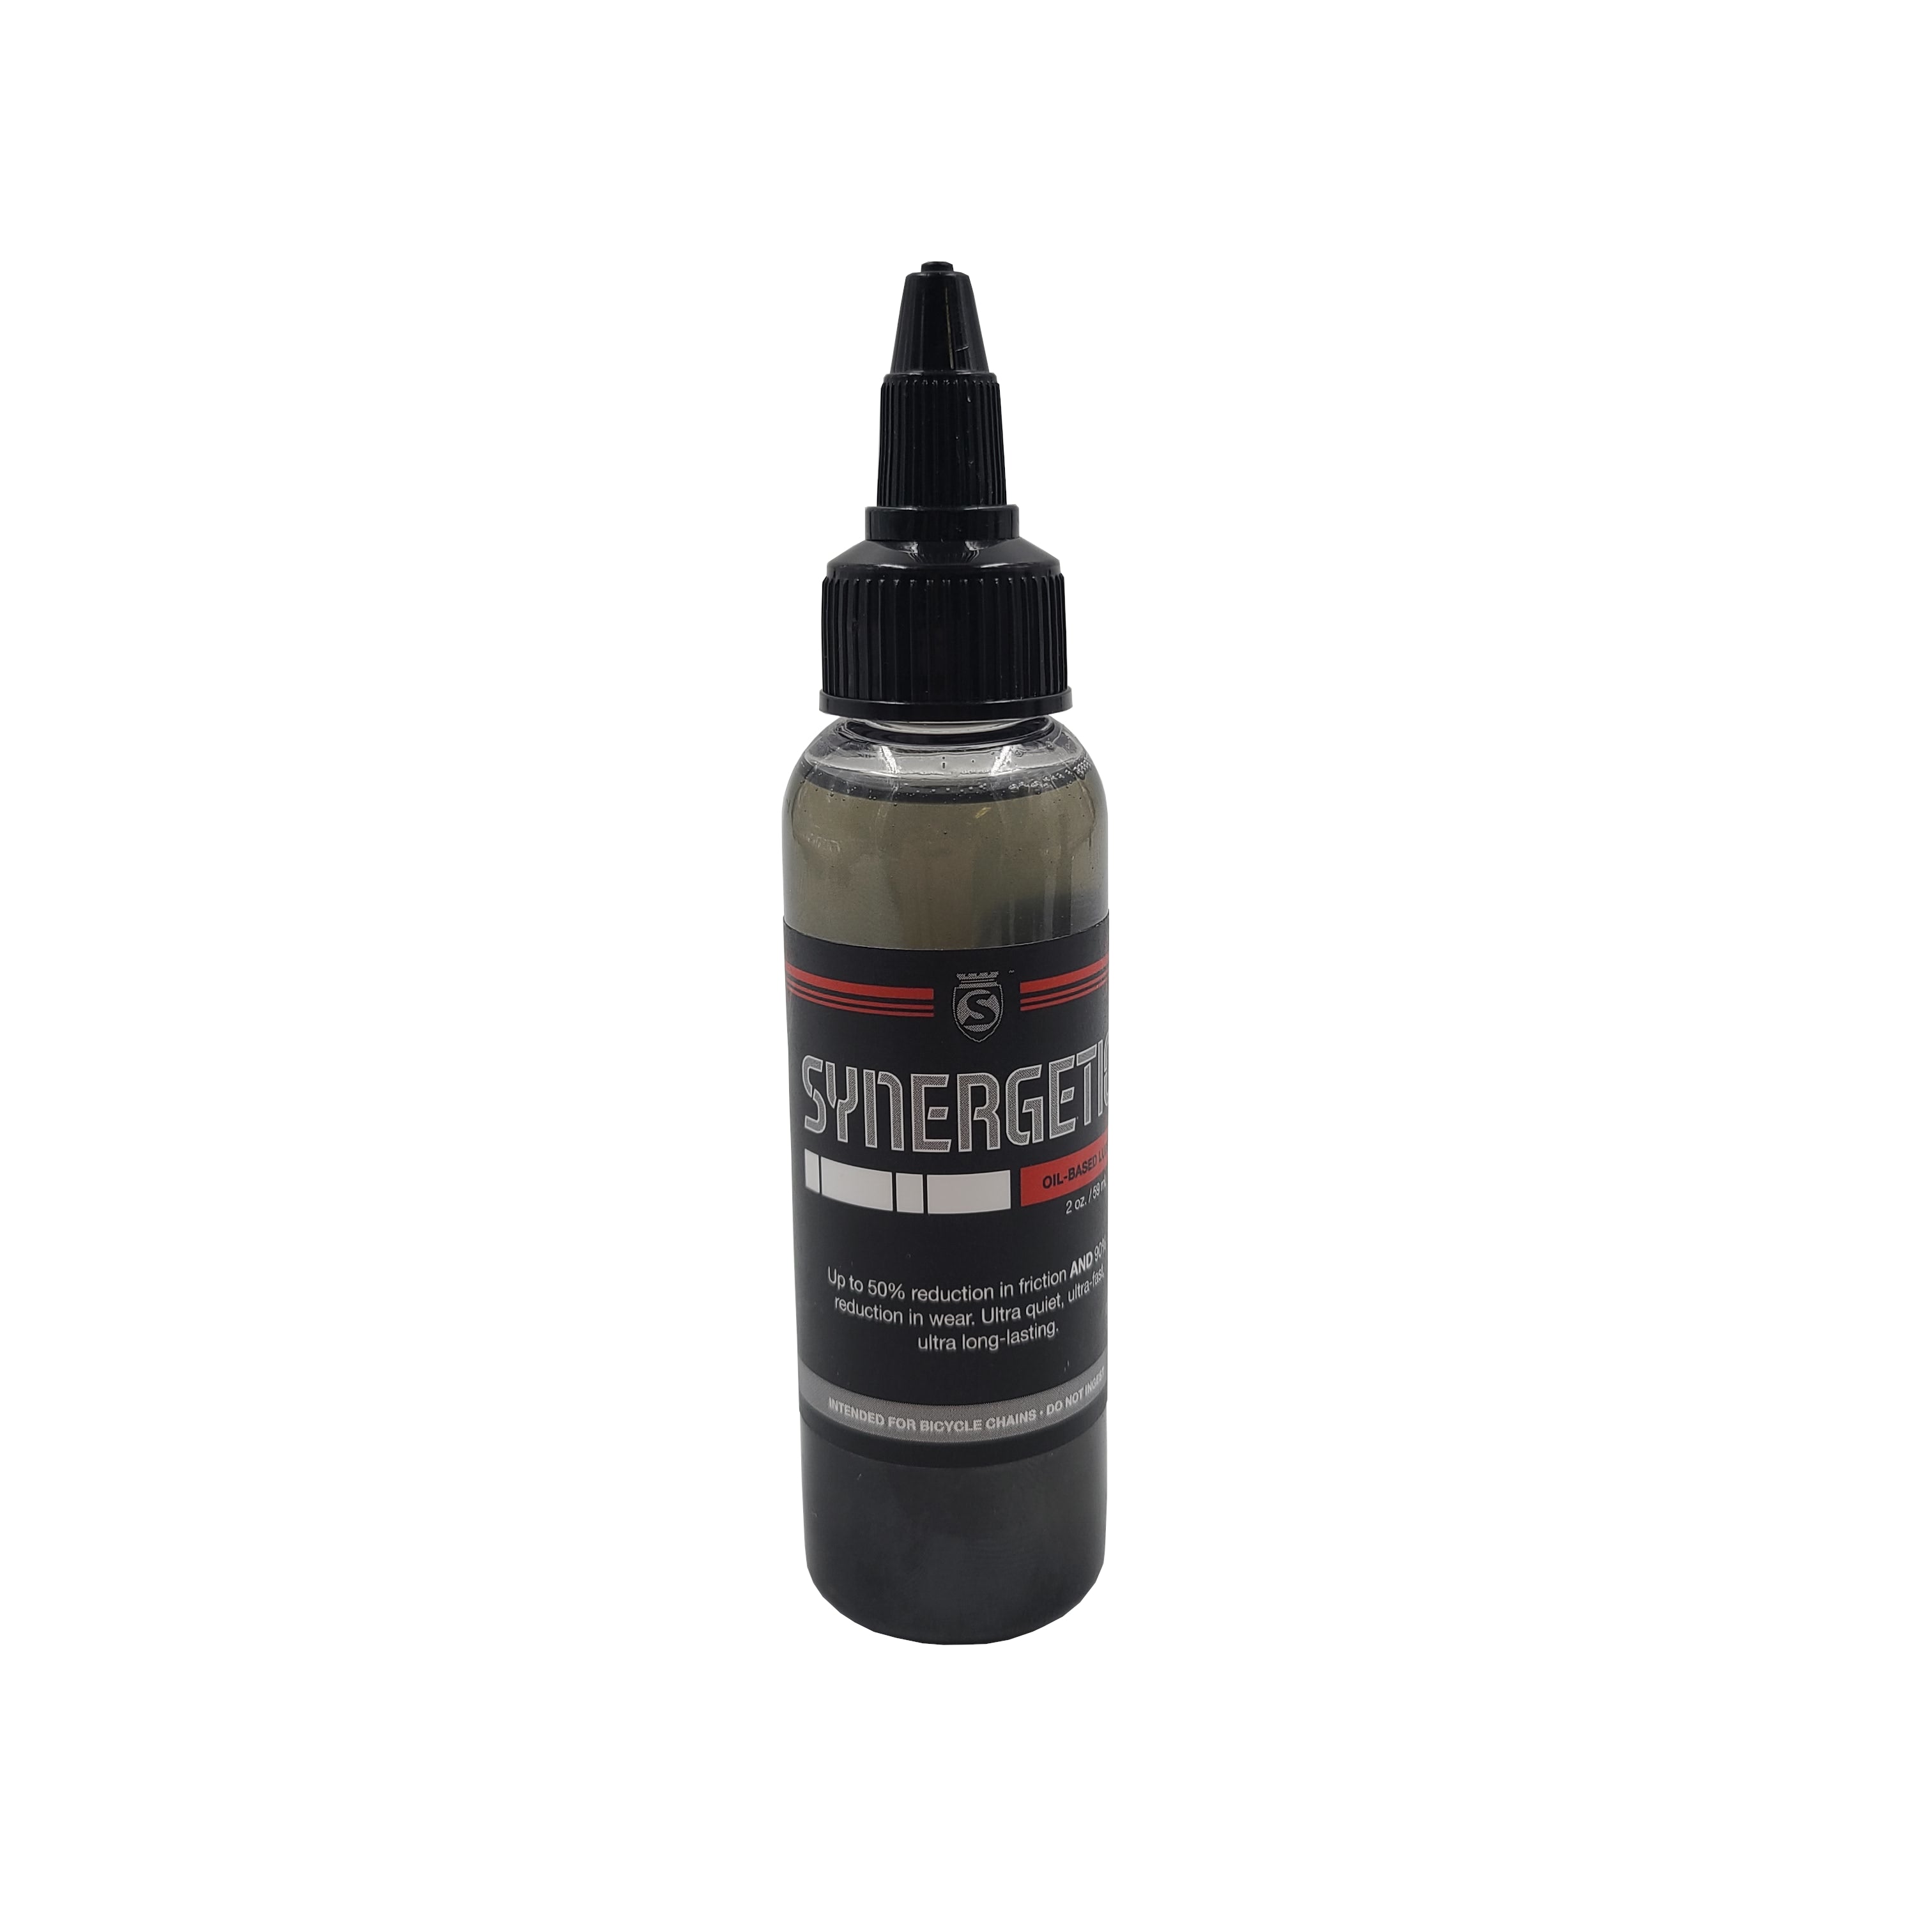 Silca Synergetic Wet Lubricant 2oz - The Bikesmiths